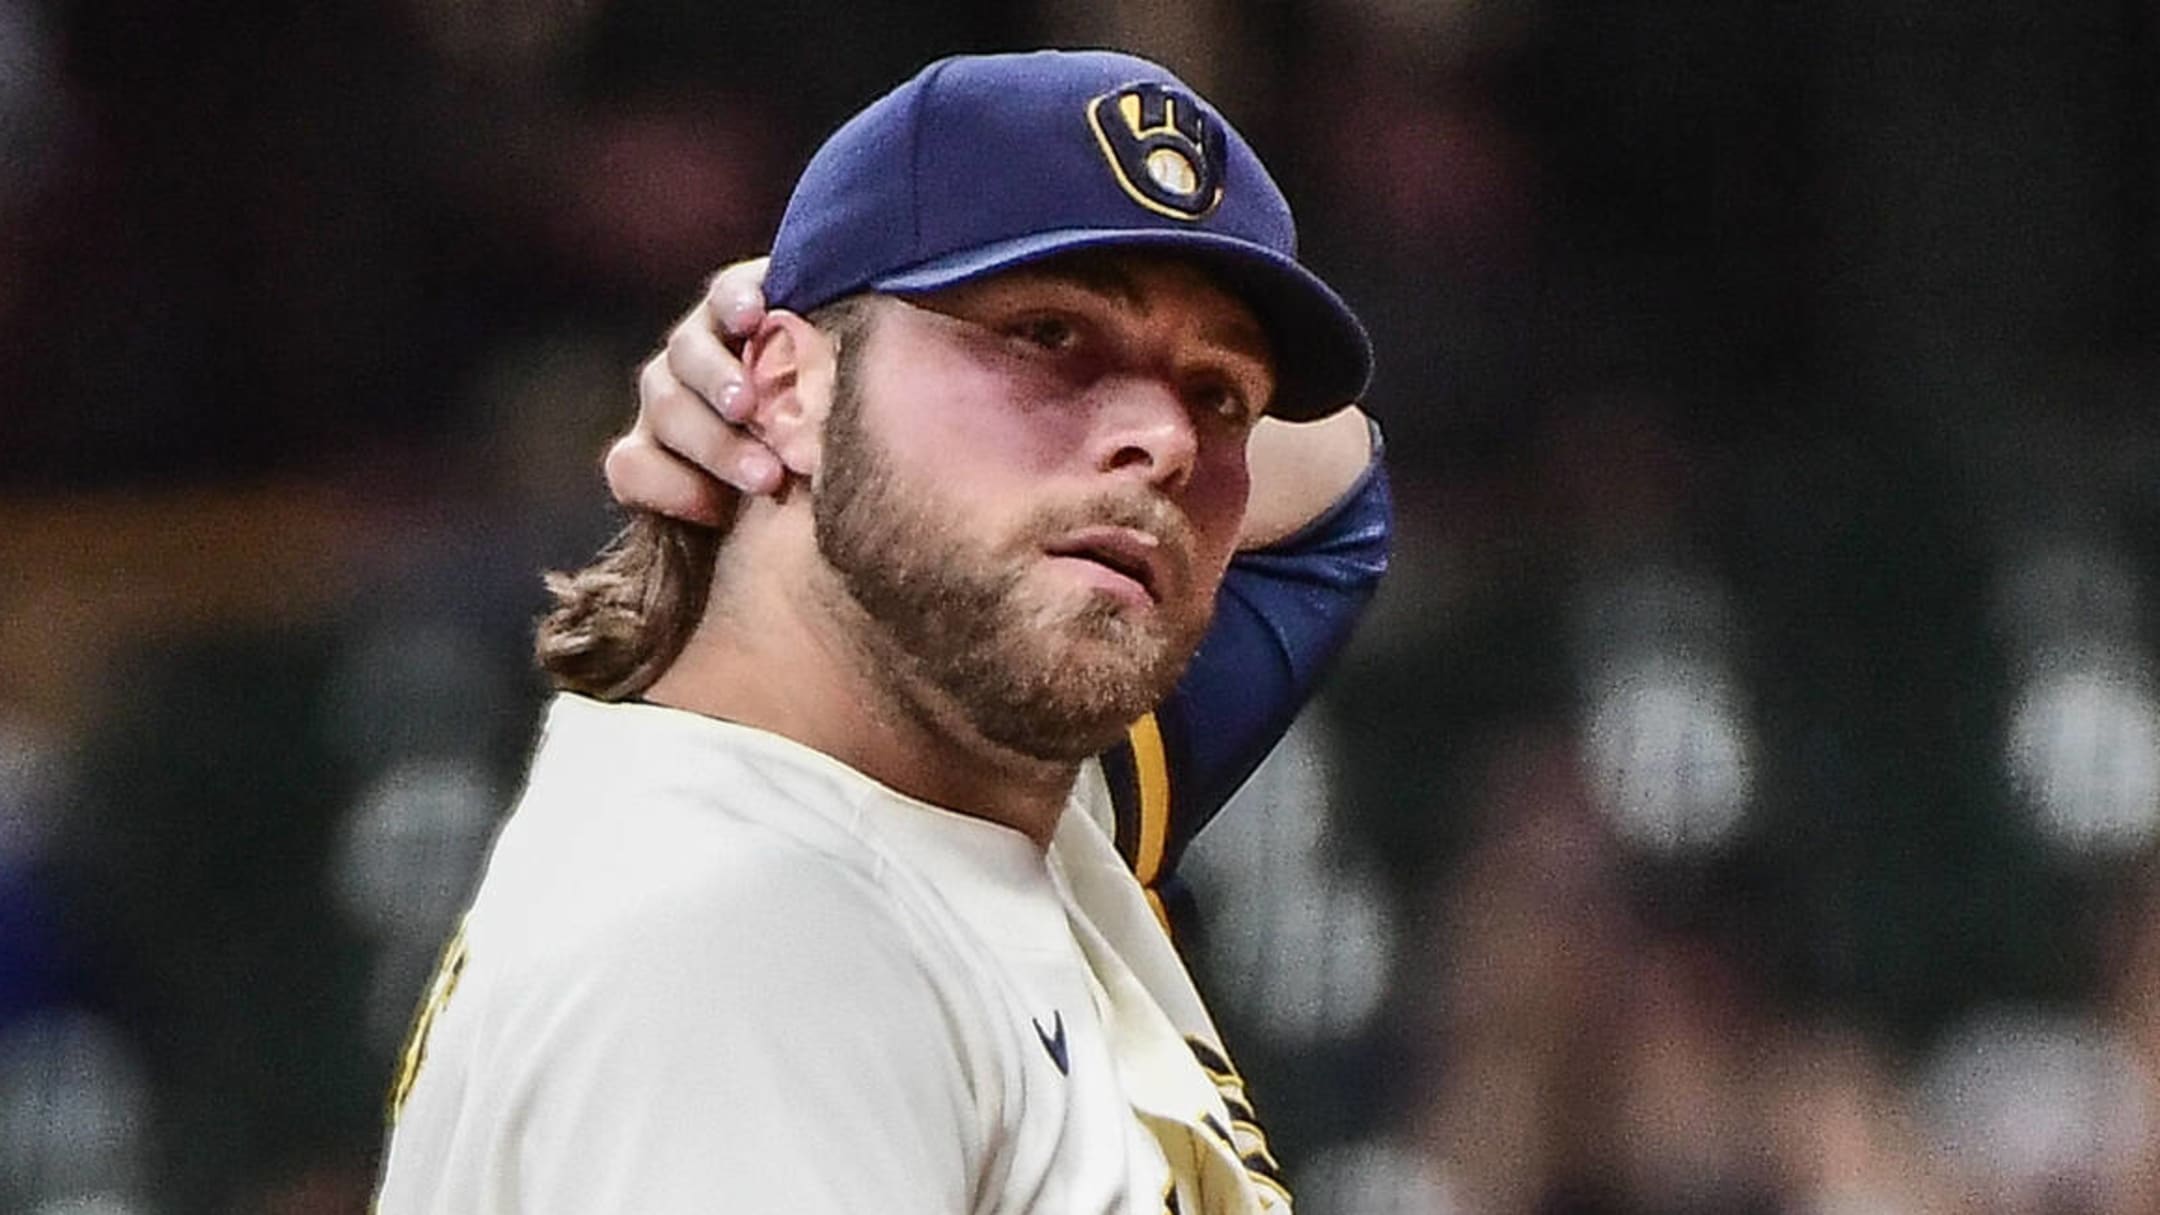 Corbin Burnes Named Brewers Minor League Pitcher of the Year